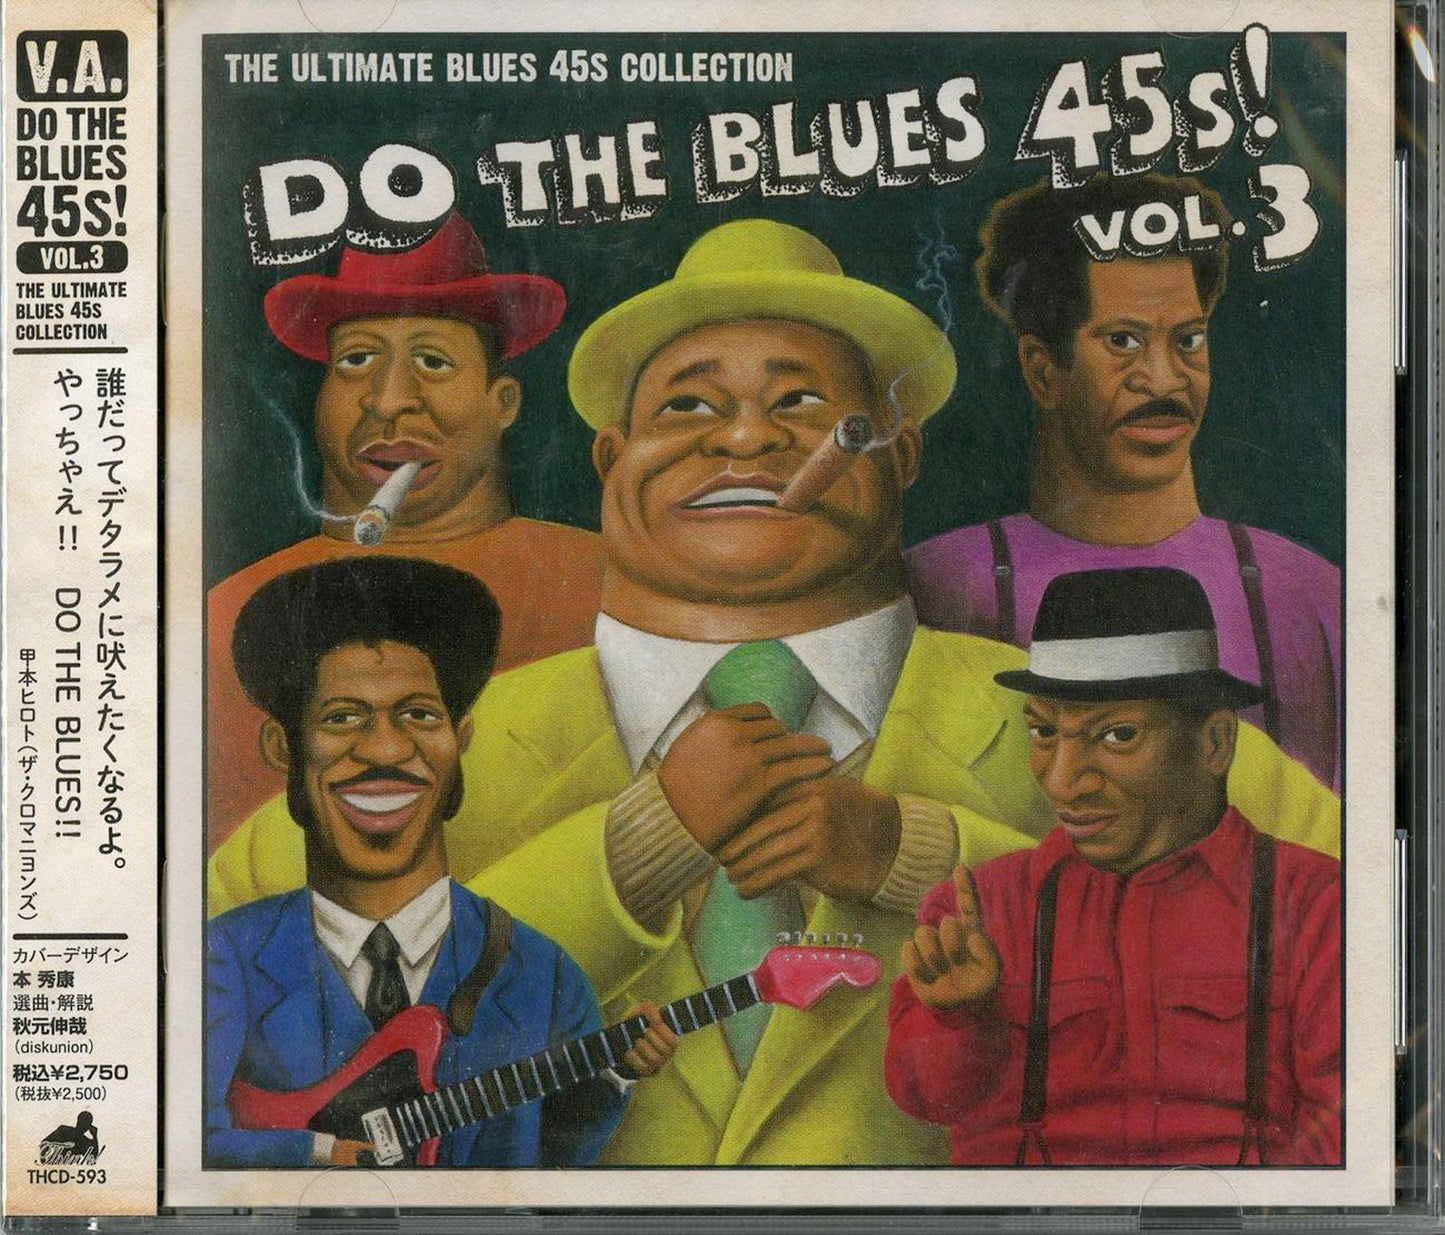 V.A. - Do The Blues 45S! Vol.3 The Ultimate Blues 45S Collection - Japan CD